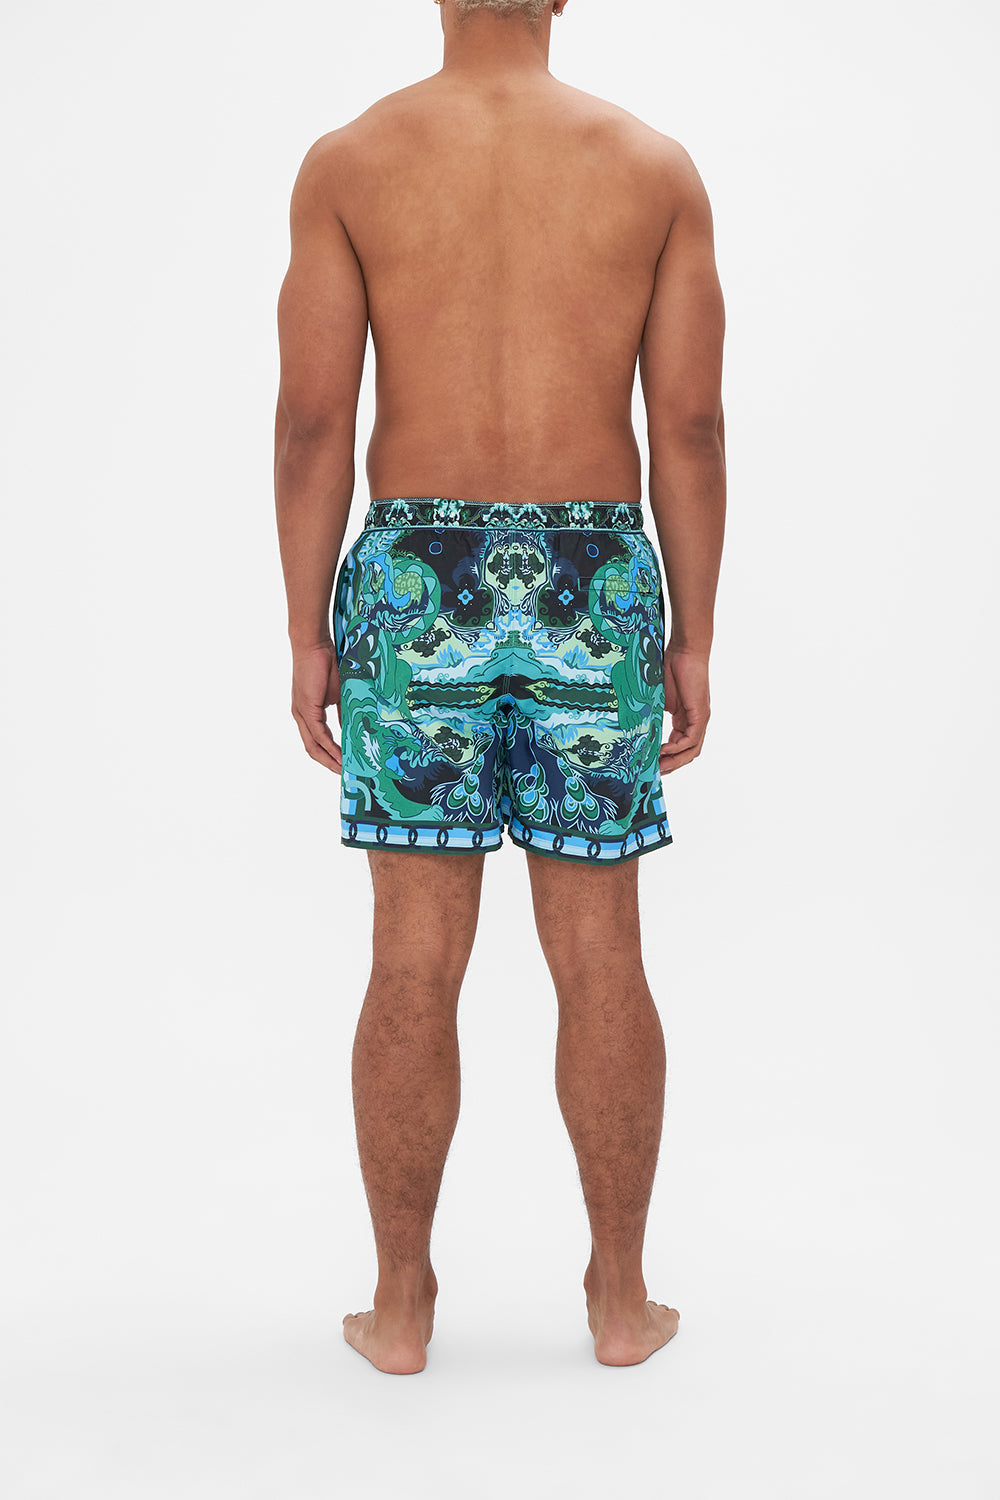 Hotel Franks By CAMILLA mens boardshorts in These Walls Are Talking print